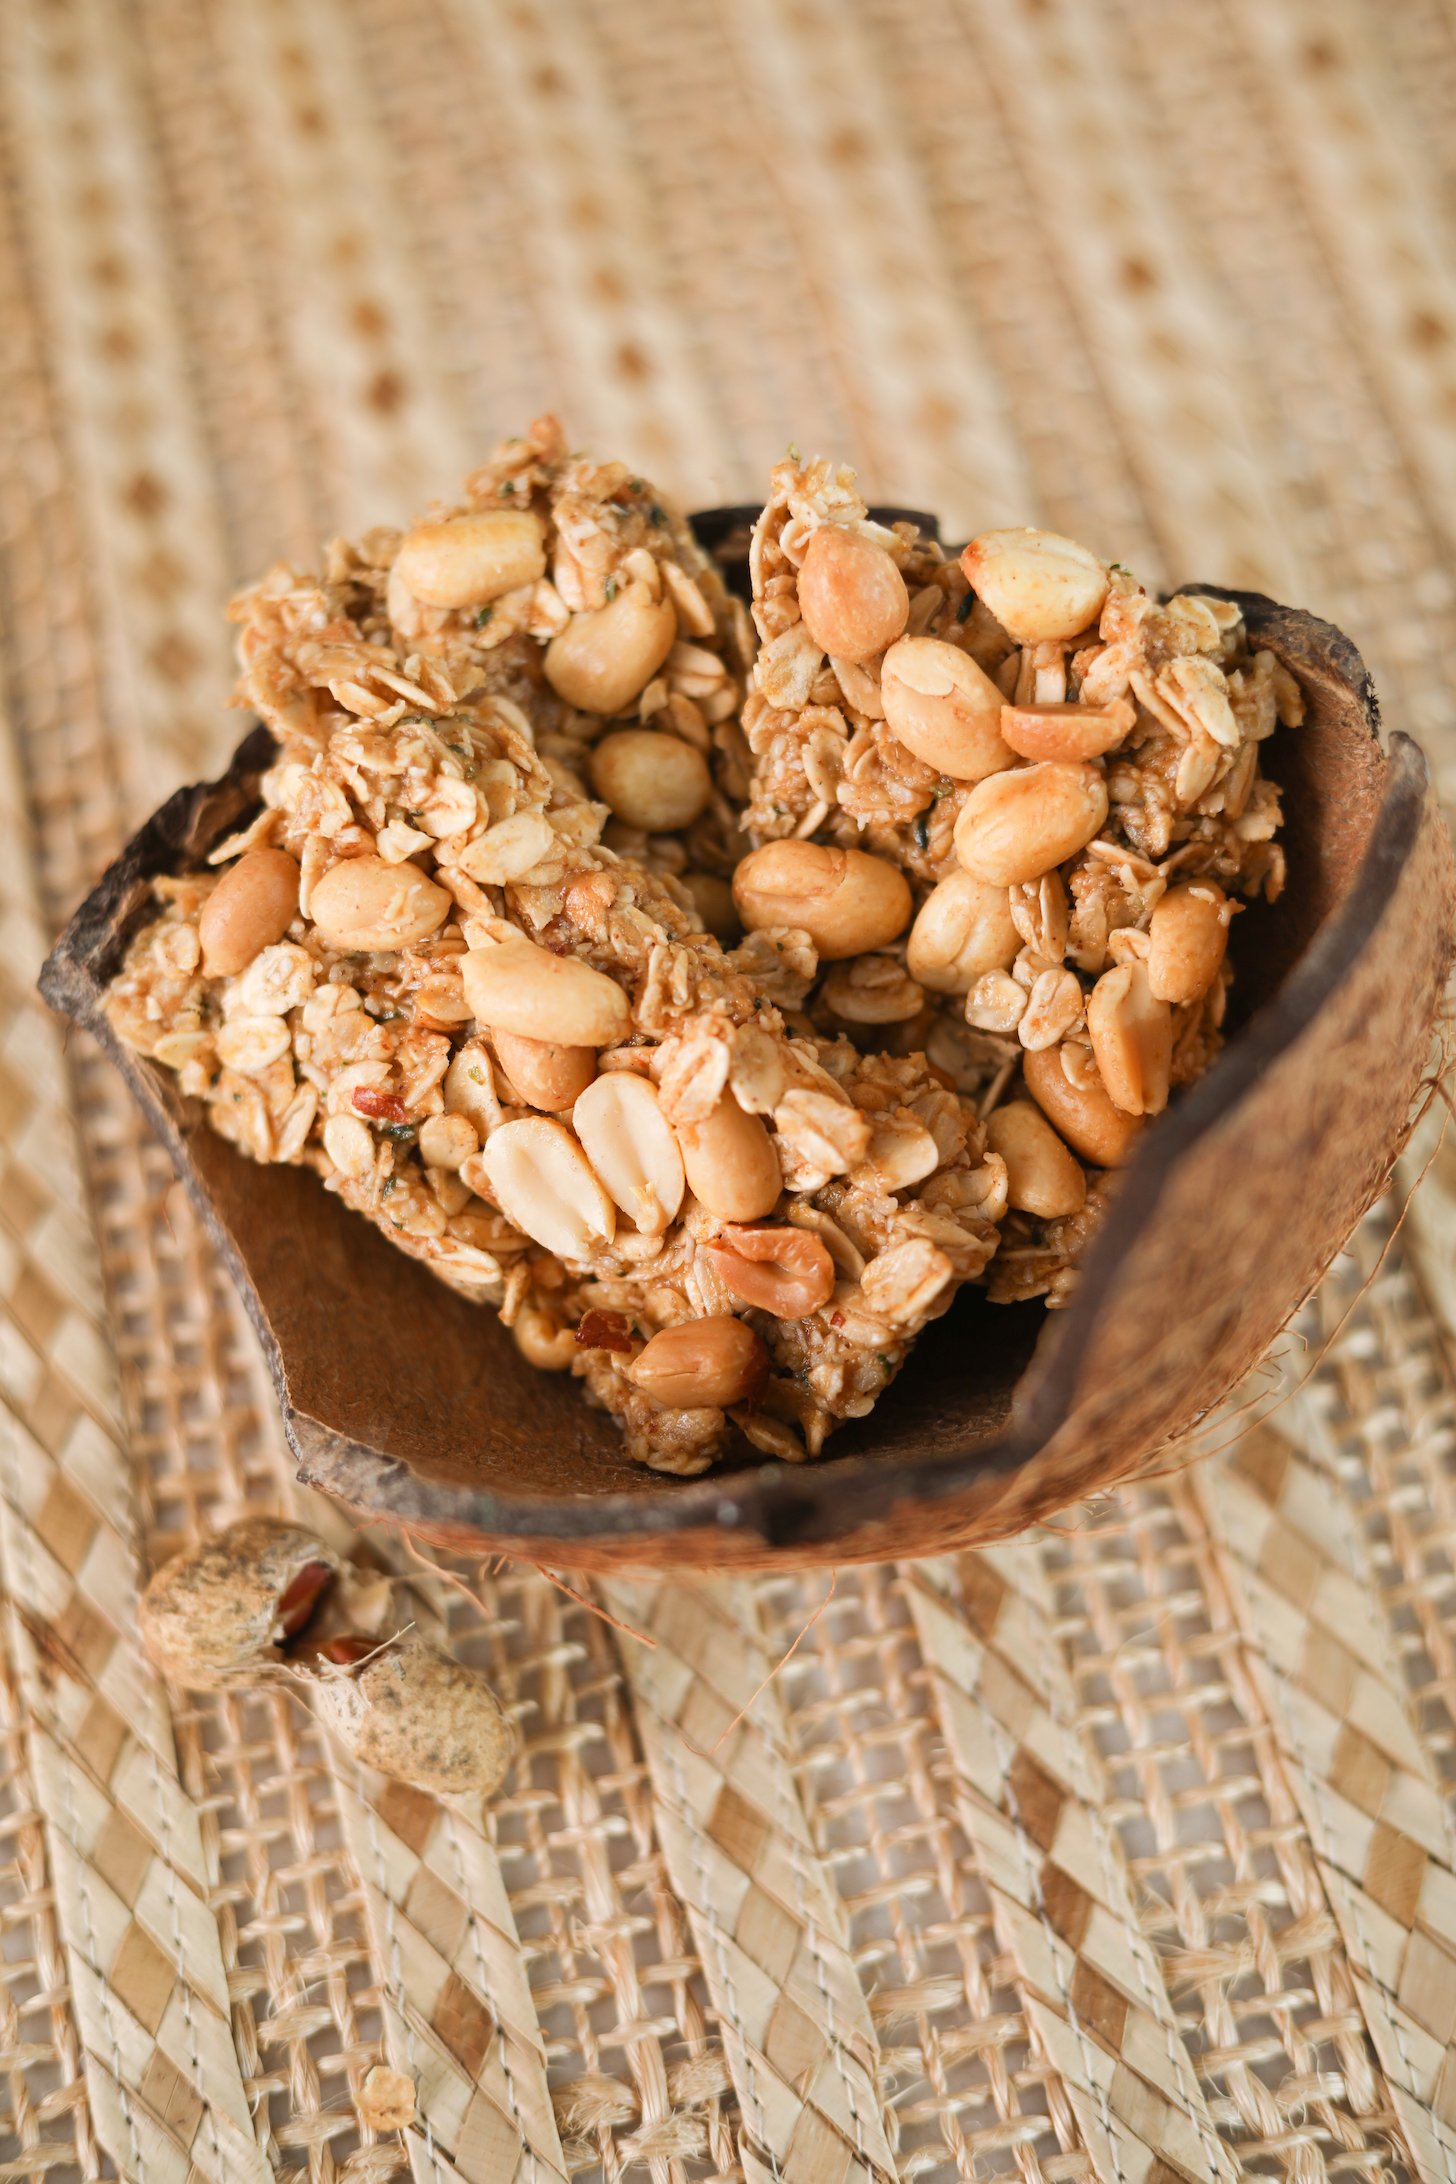 Three oat bars topped with peanuts in a coconut bowl.